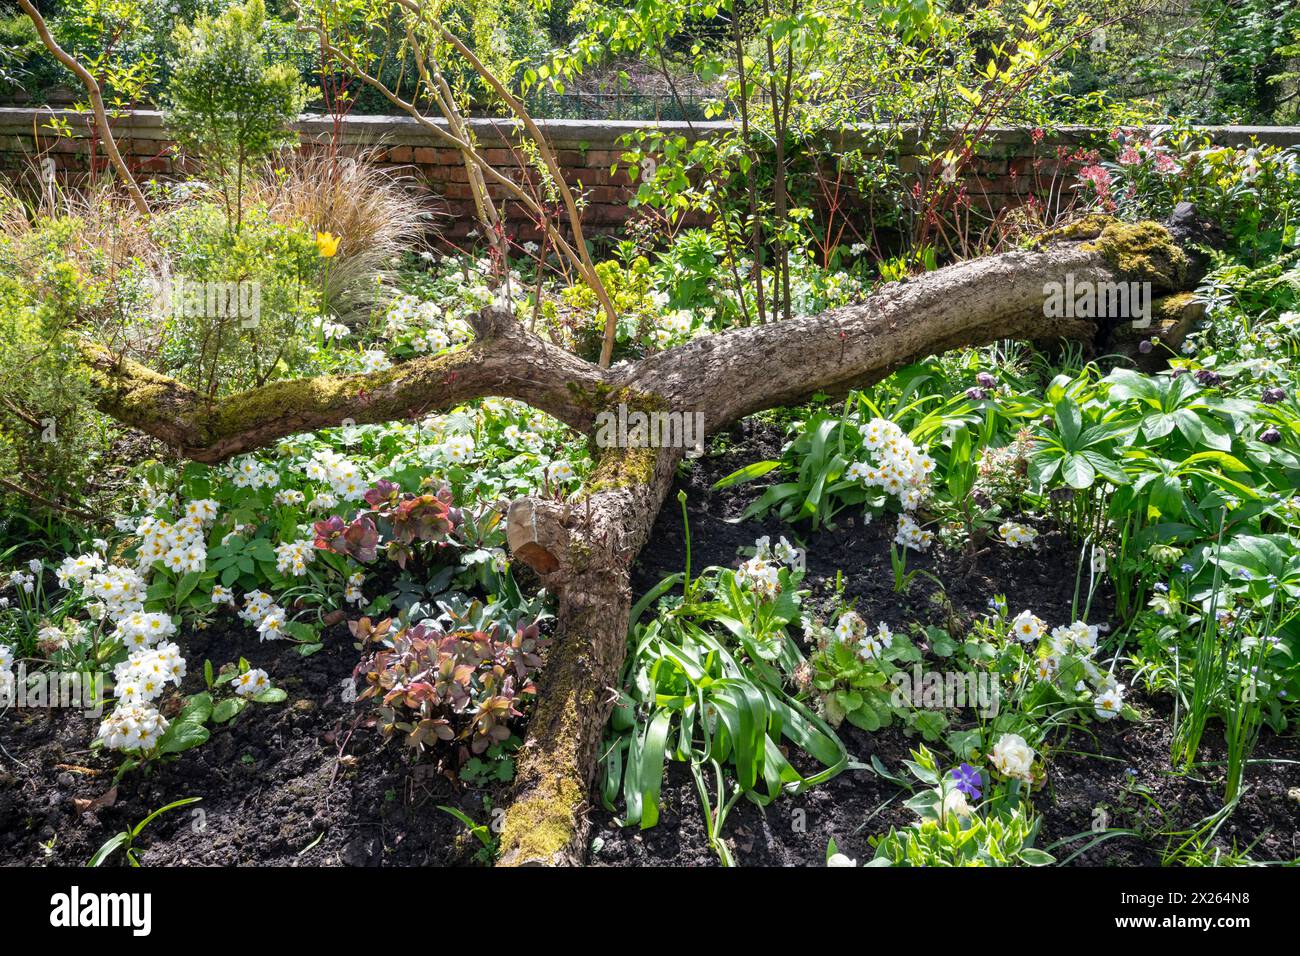 Mixed planting including white Polyanthus beside a fallen tree in Fletcher Moss botanical garden at Didsbury in South Manchester. Stock Photo